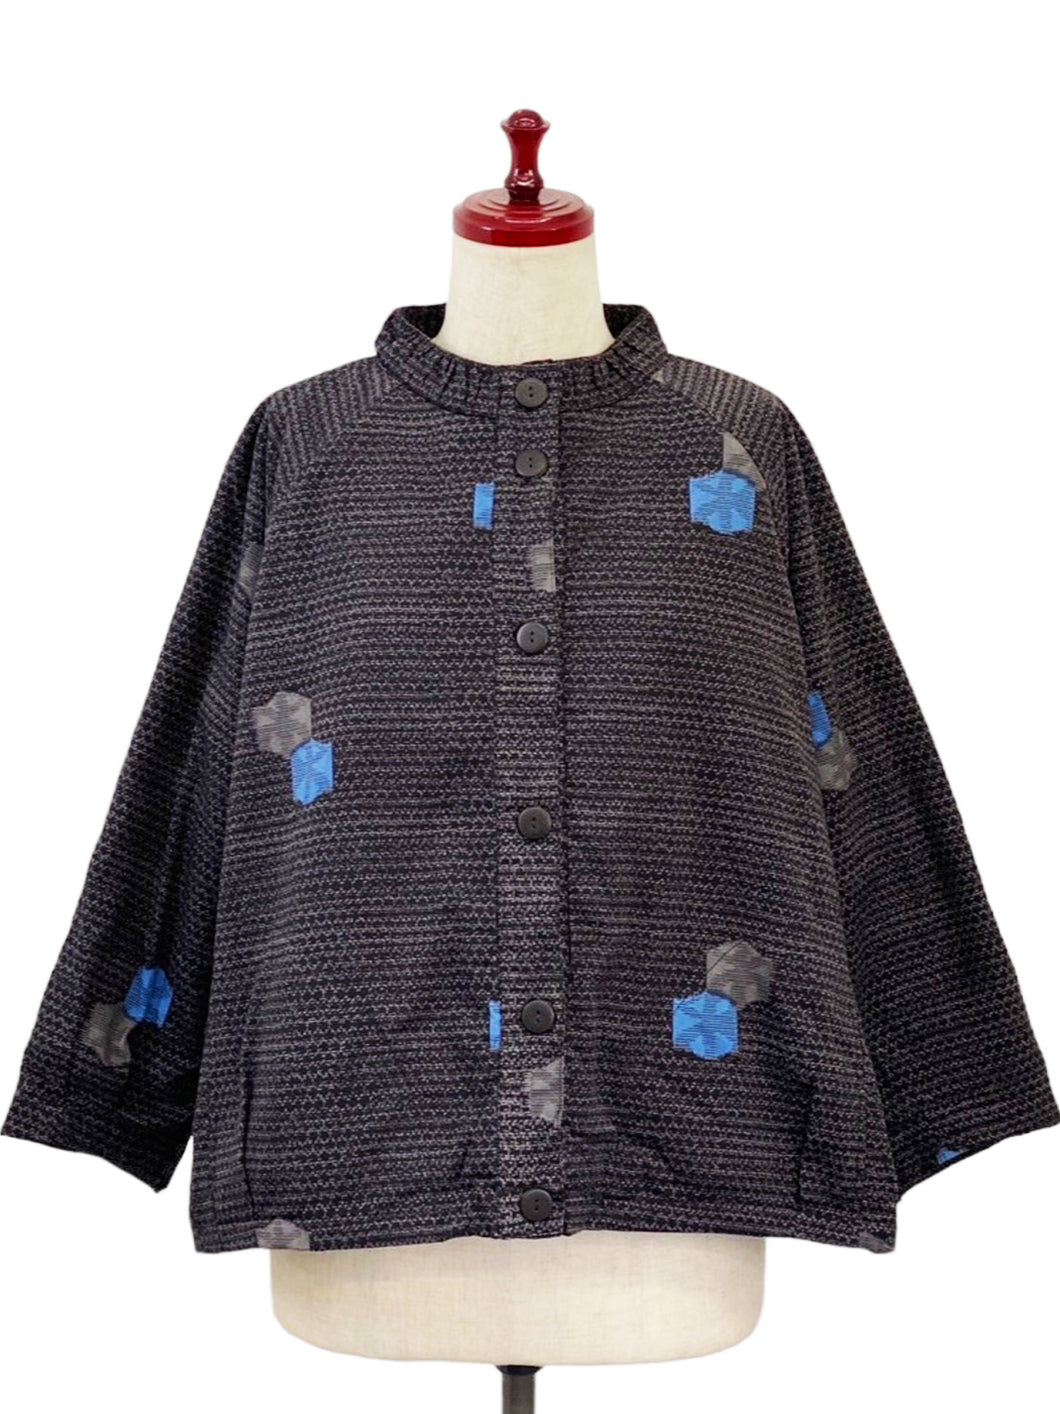 Ruched Collar Jacket - Fleece Lined - Star Glory Print - Black